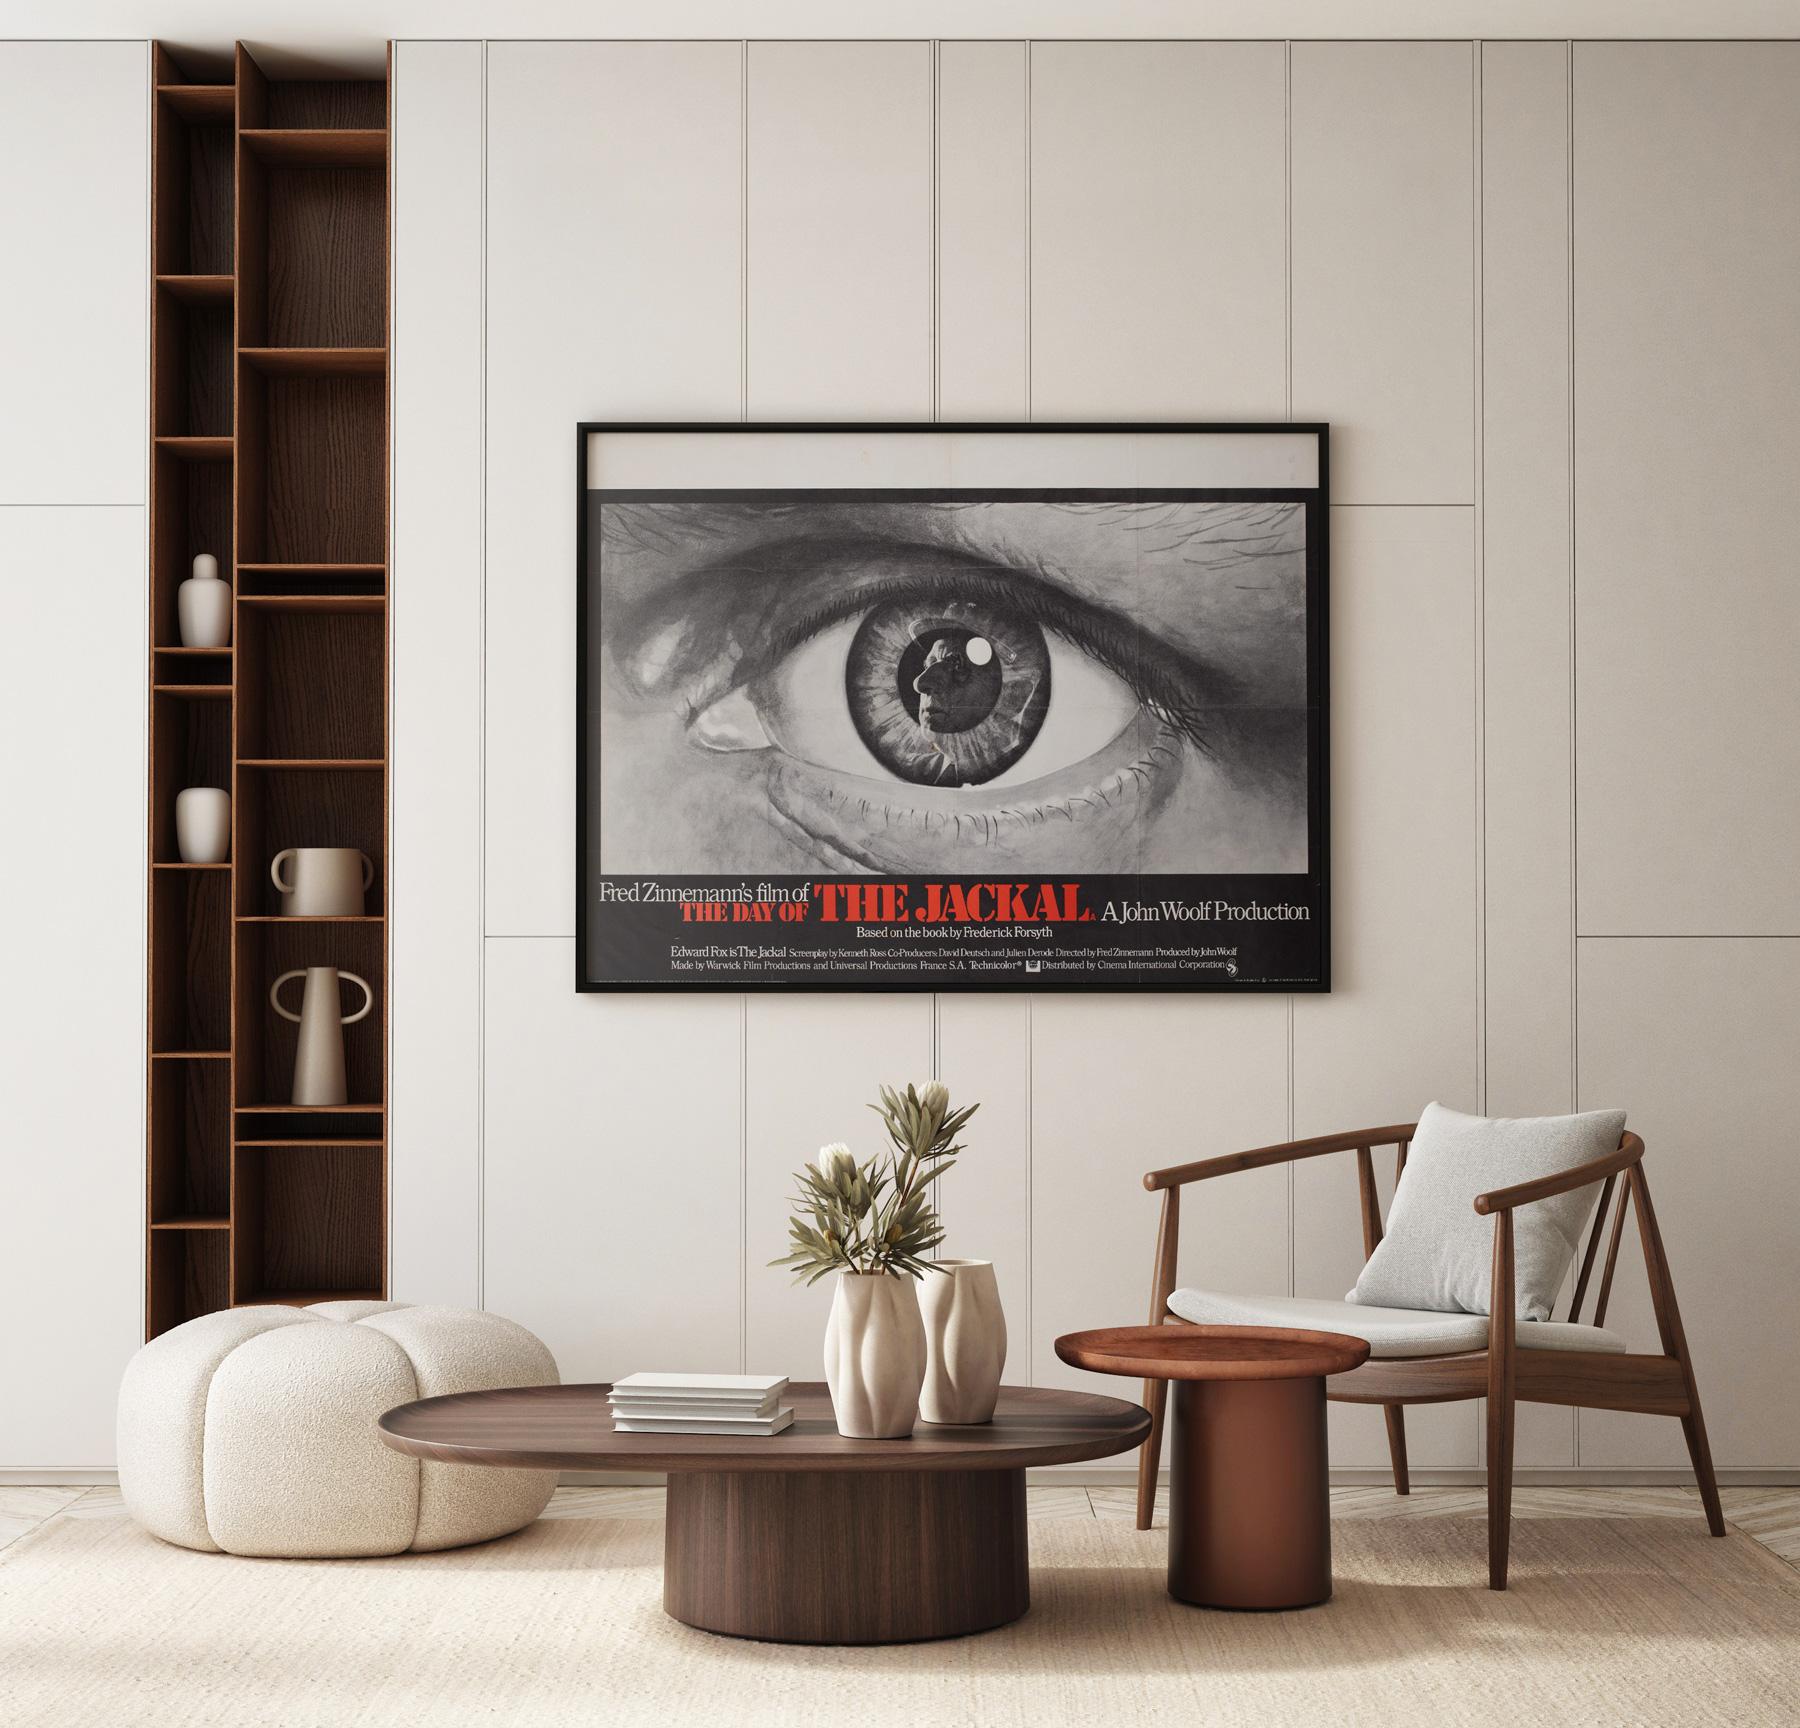 The artwork that features on the UK quad for classic 70s thriller The Day of the Jackal is one of our favourites, very clever, very striking... Eye-catching in fact!

This vintage movie poster is sized 30 x 40 nches and will be sent rolled